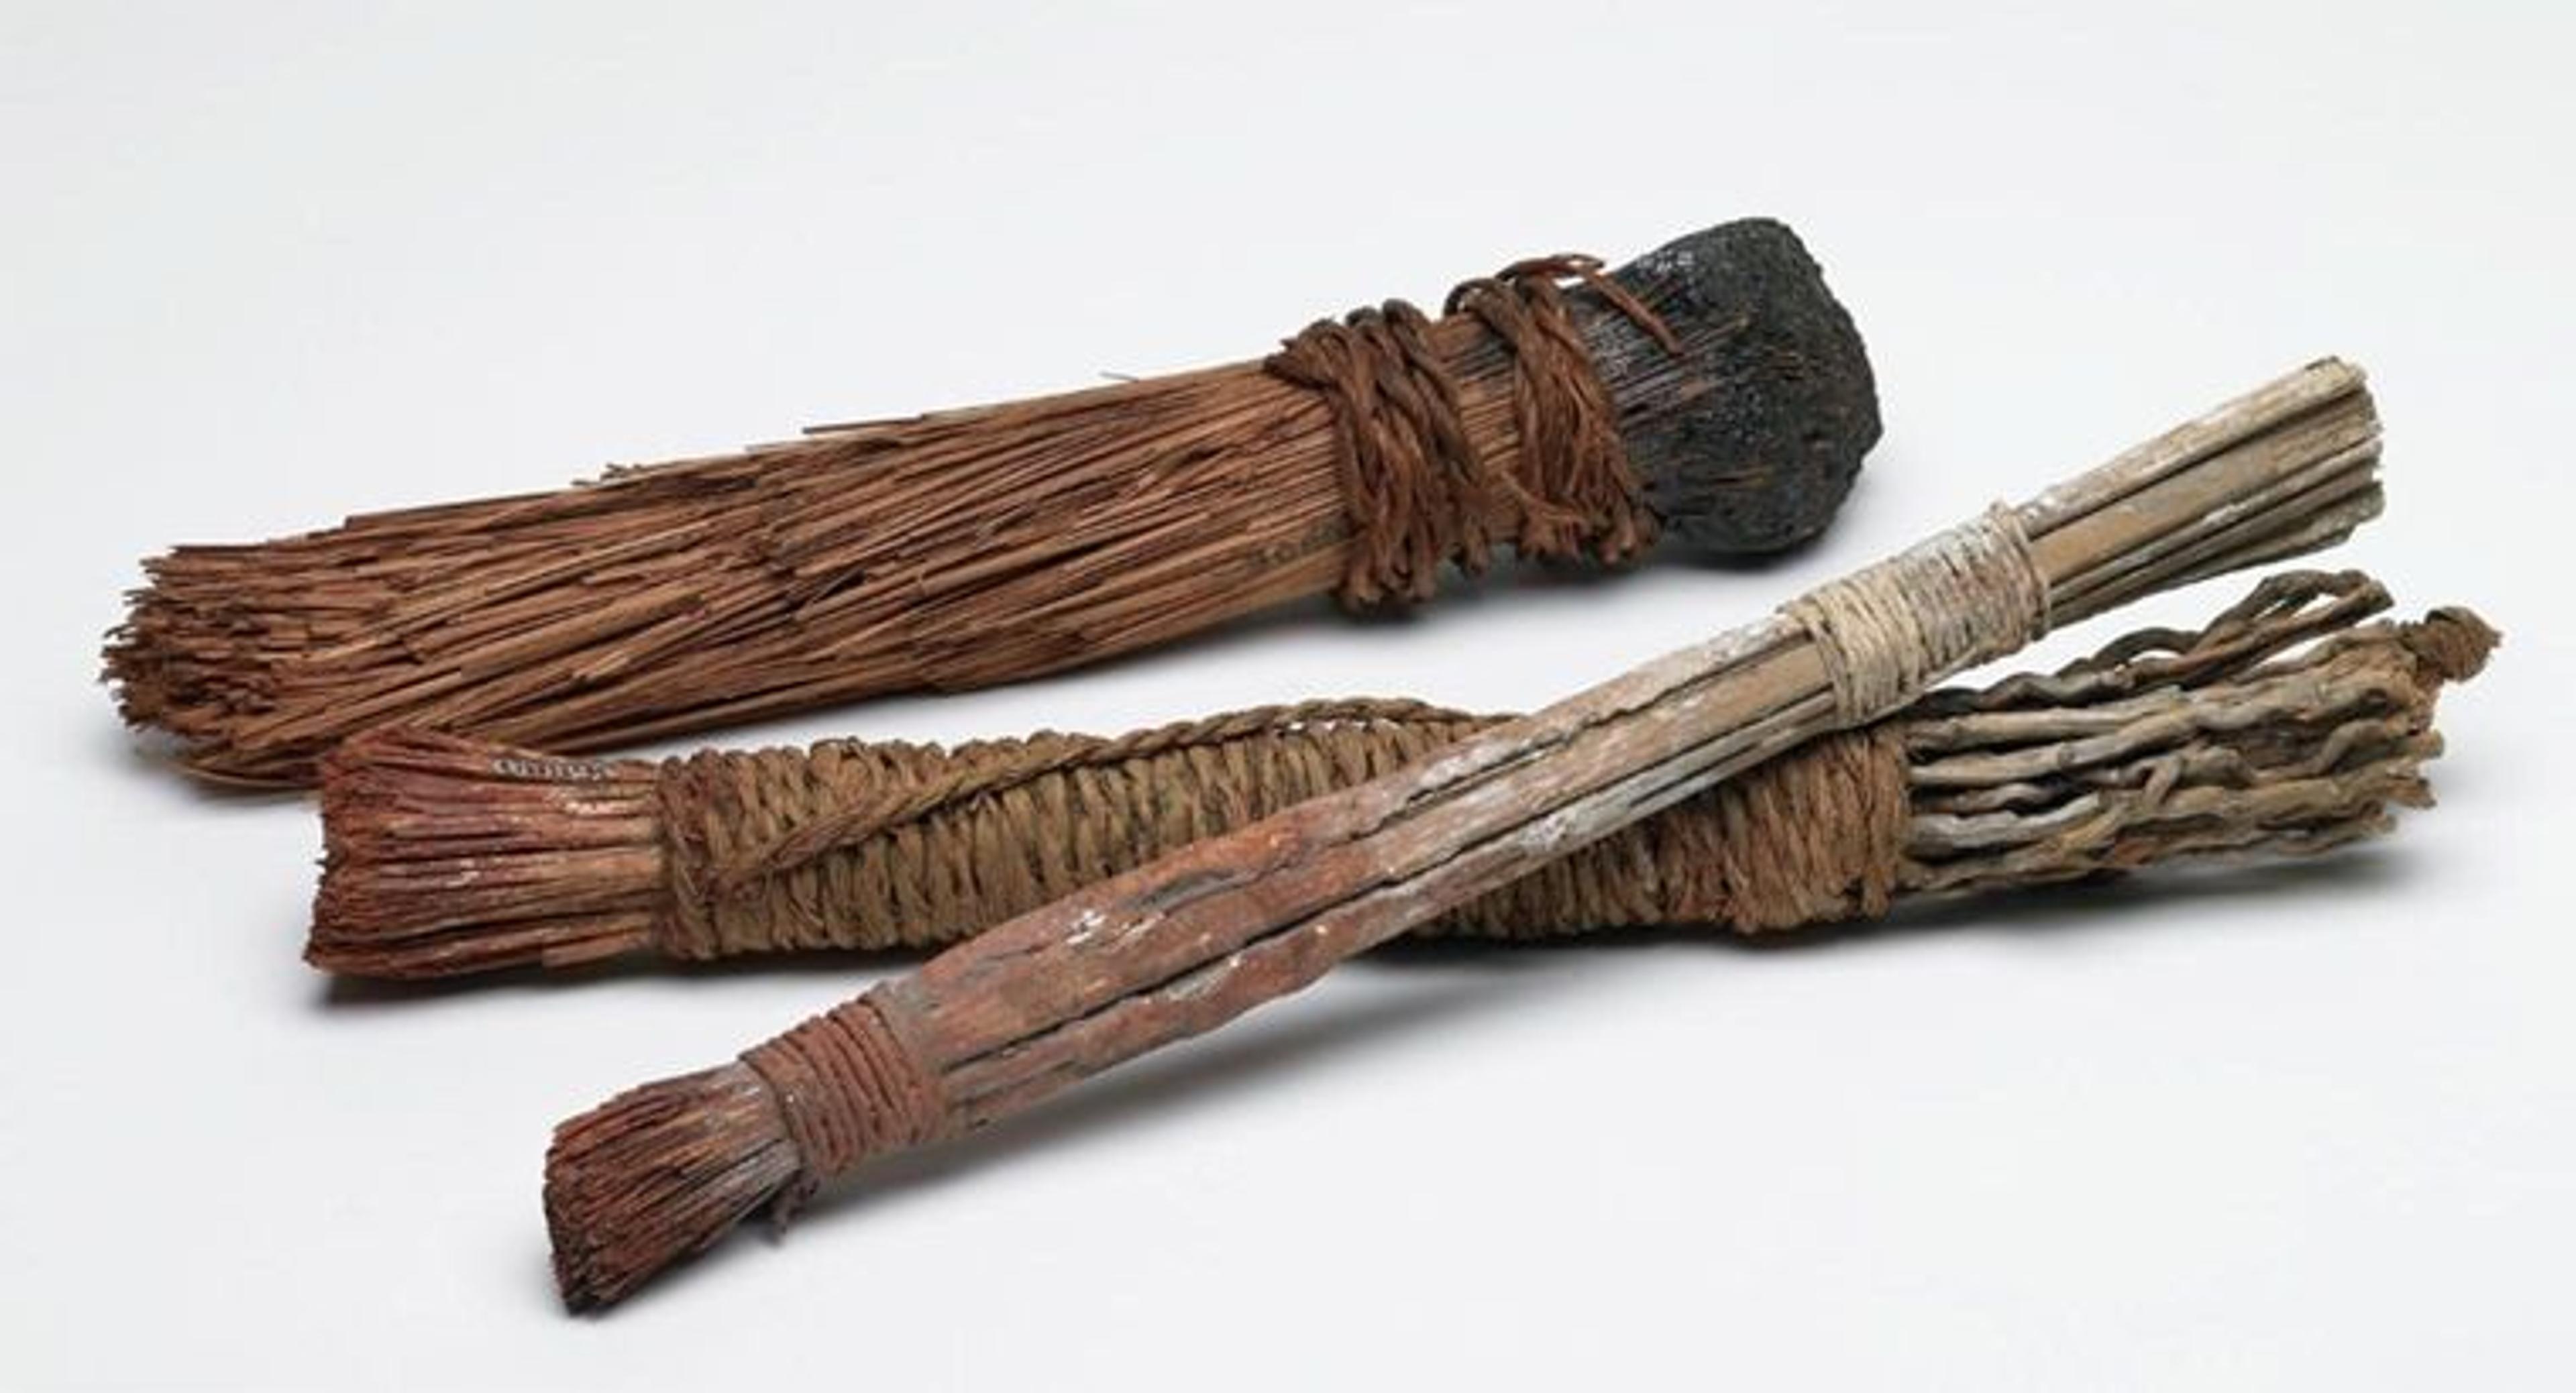 Three ancient Egyptian paint brushes against a white background.